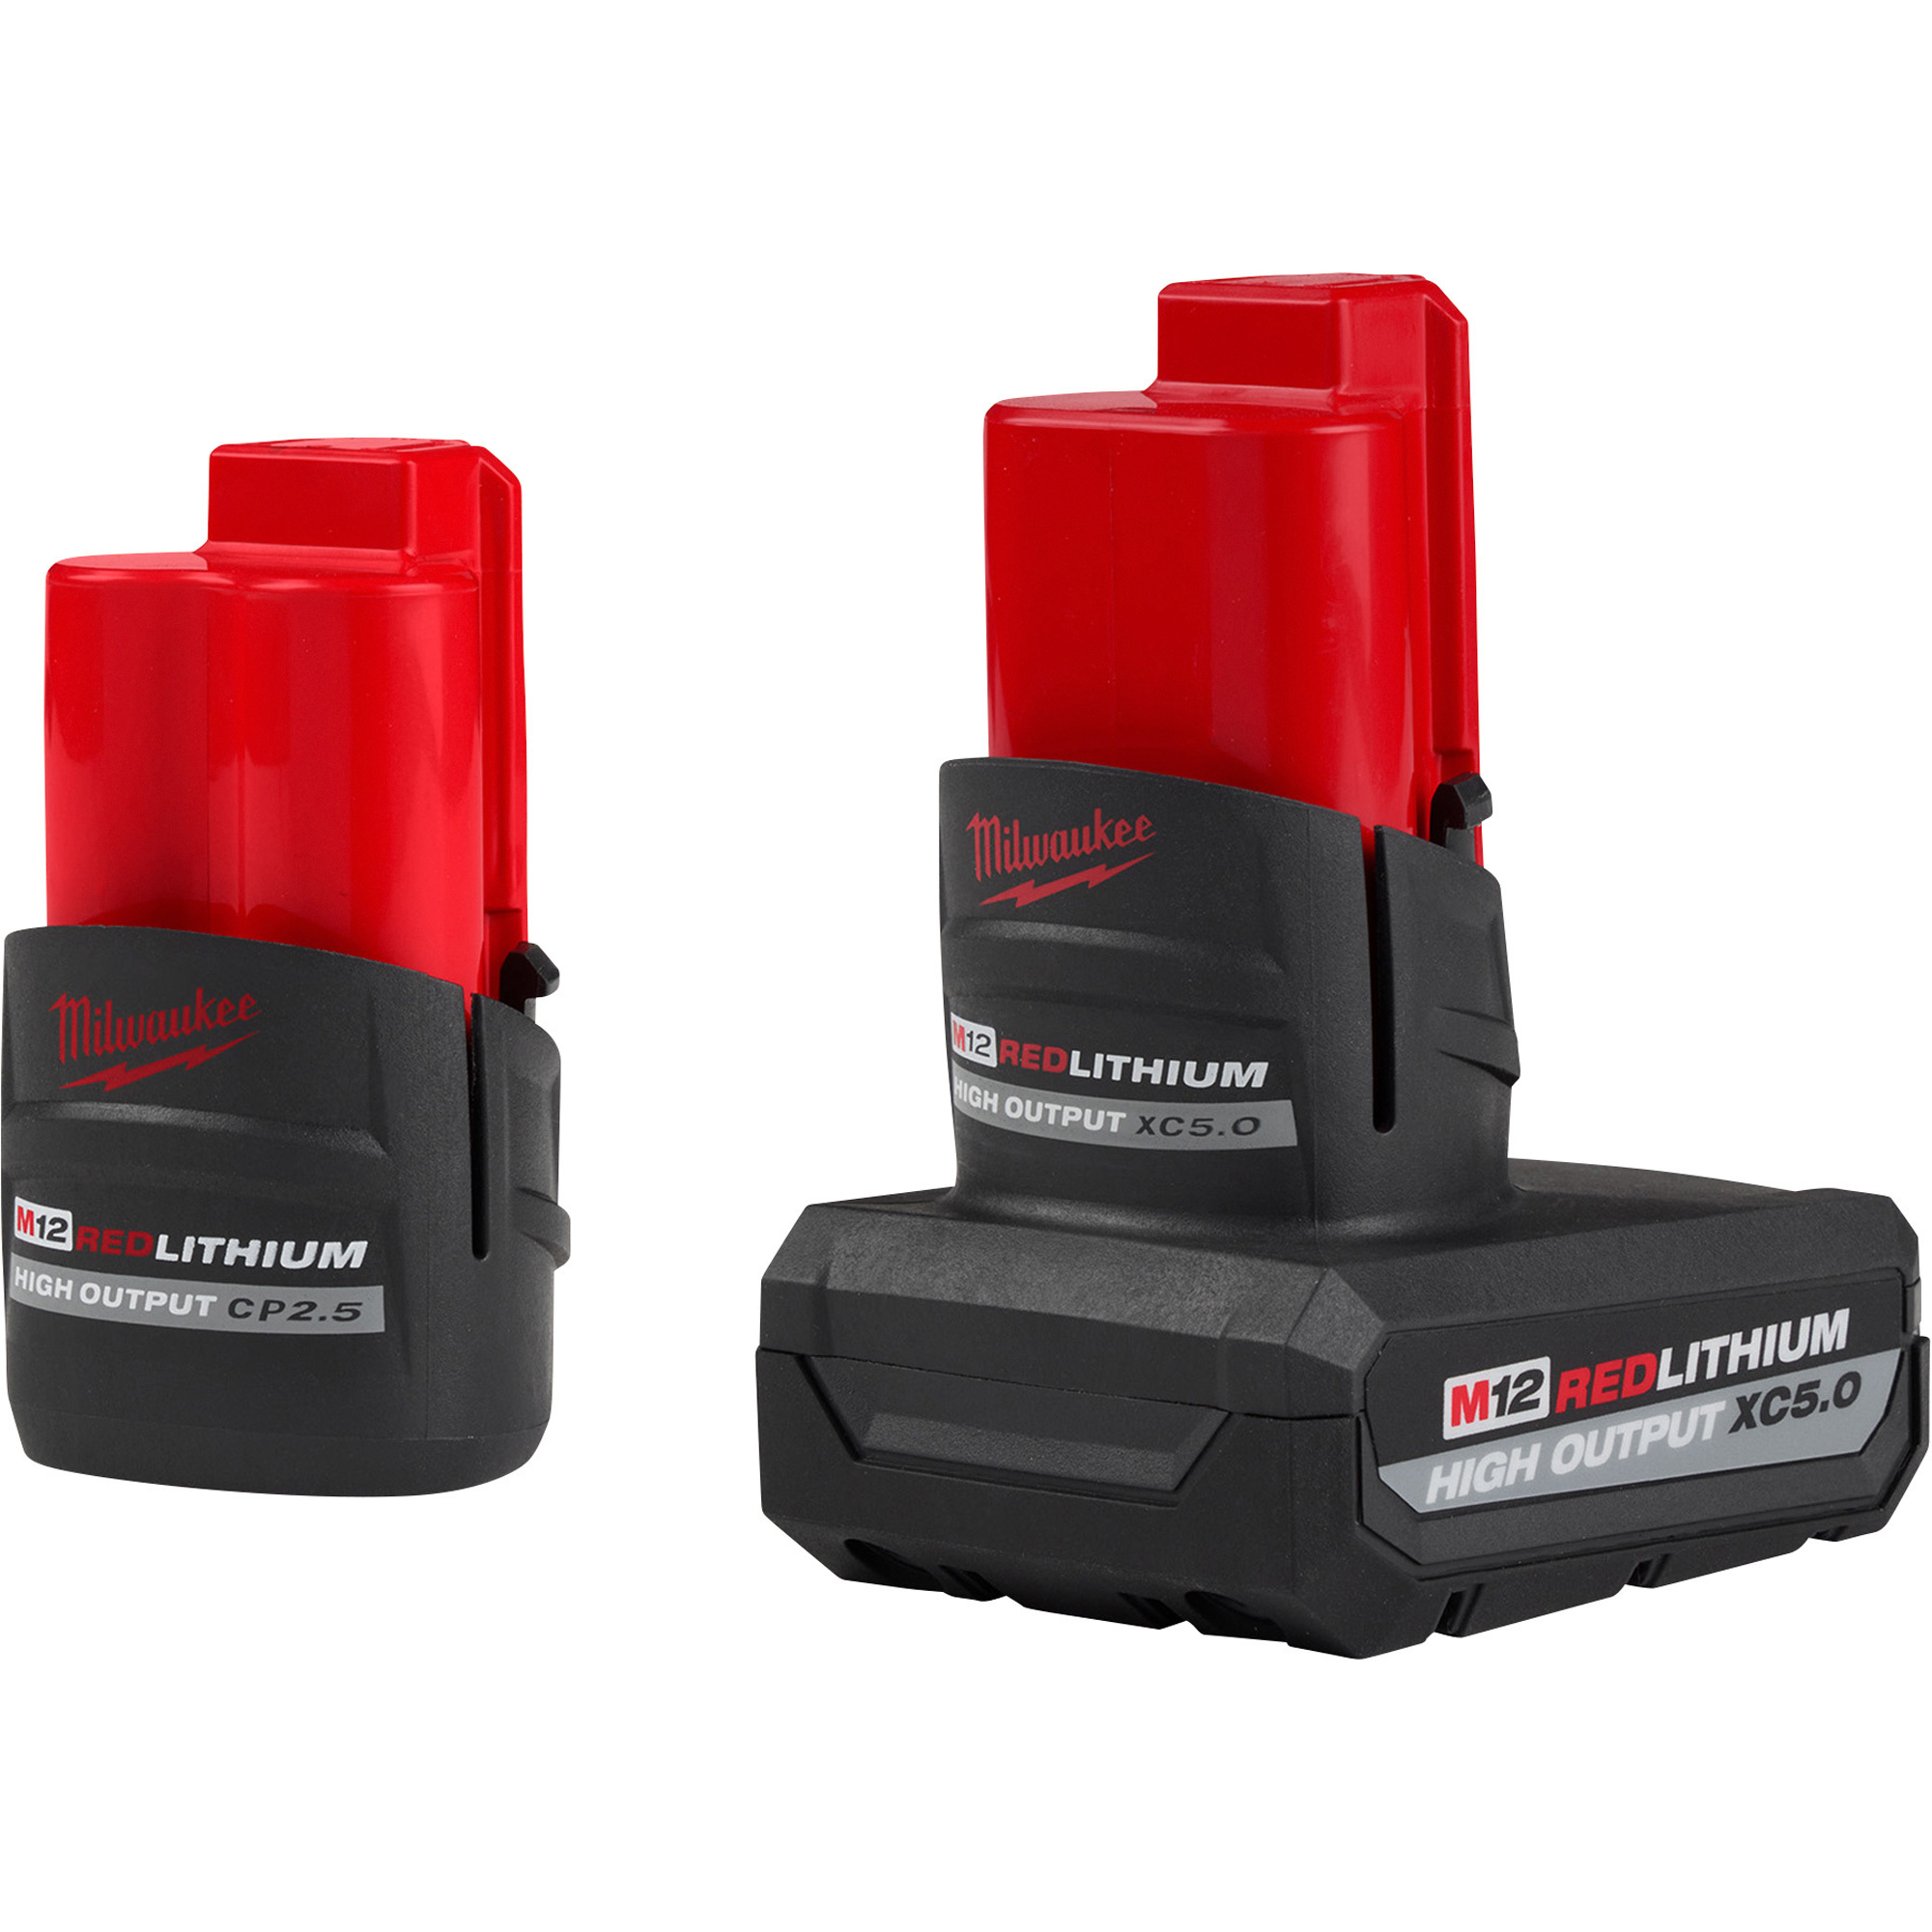 Milwaukee M12 REDLITHIUM High Output XC5.0 and CP2.5 Battery Packs, 2-Pack, Model 48-11-2452S